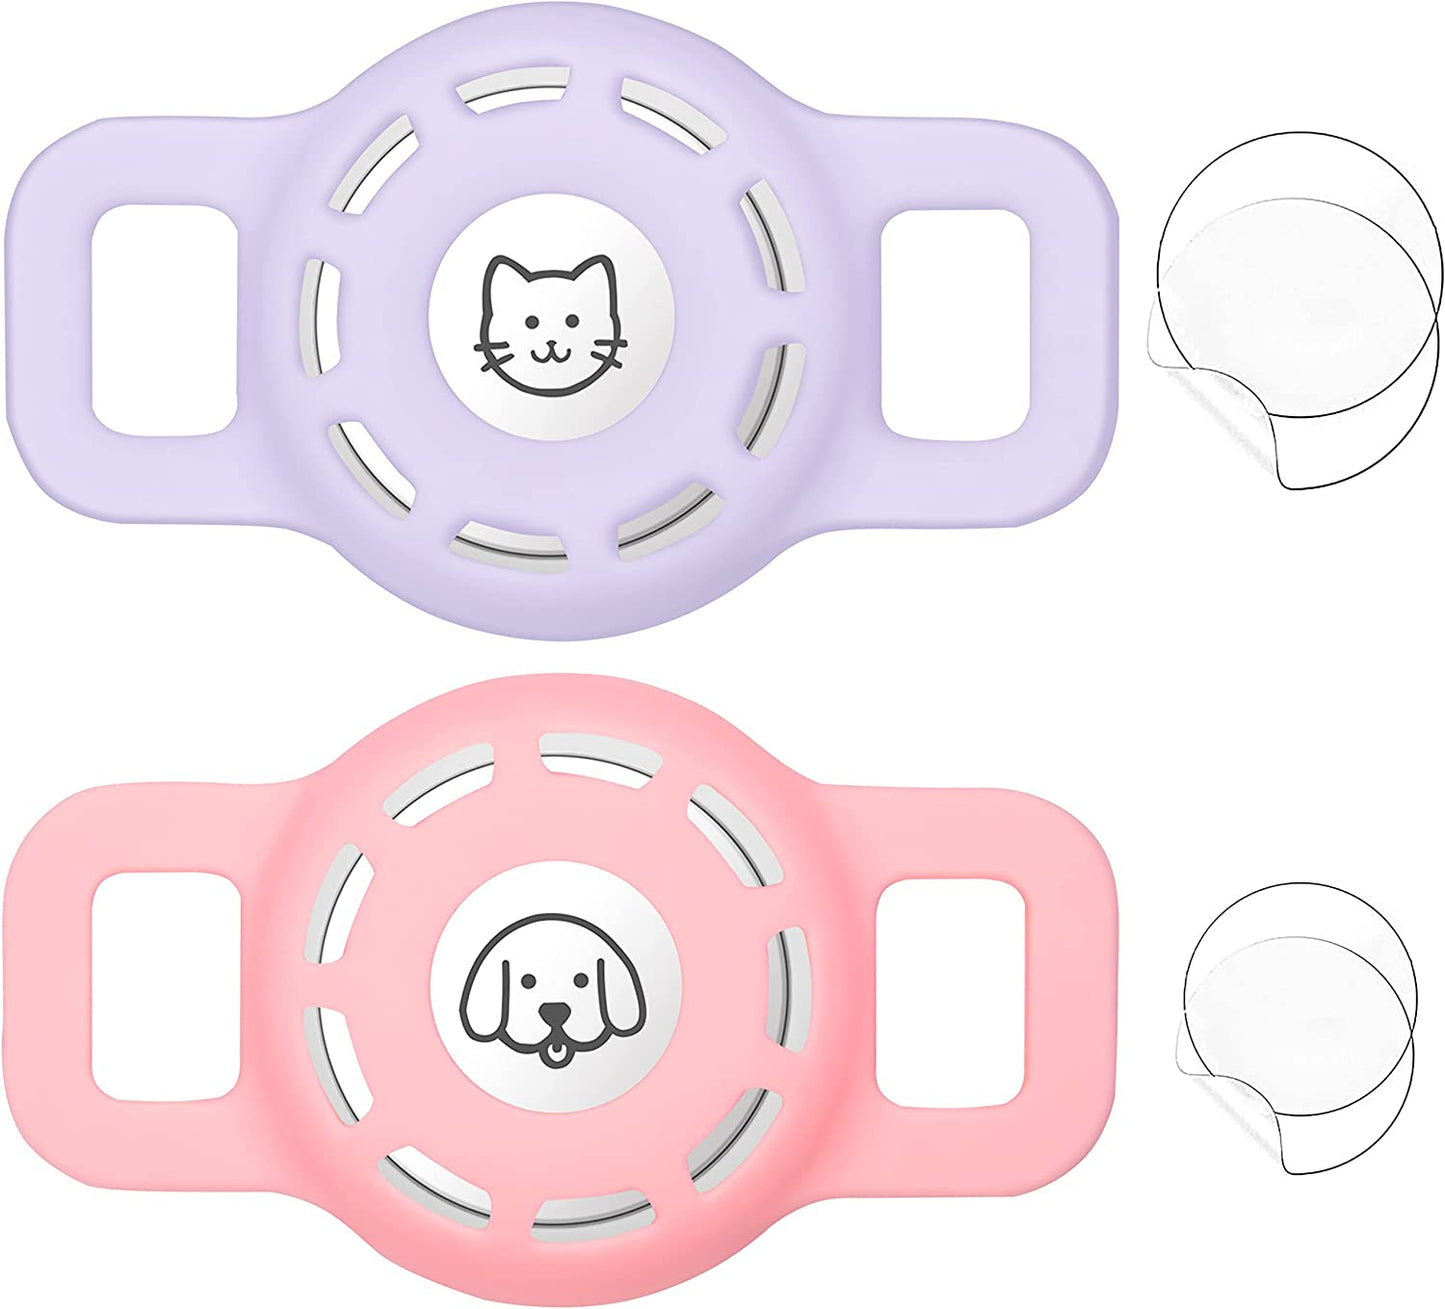 Airtag Cat Collar Holder for Apple Air Tag Cat Collar Holder within 0.6 Inch, Airtag Dog Collar Holder Small, 2 Pack Airtag Pet Collar Holder for Apple Airtag Collar and 2 Pack Airtag Protector